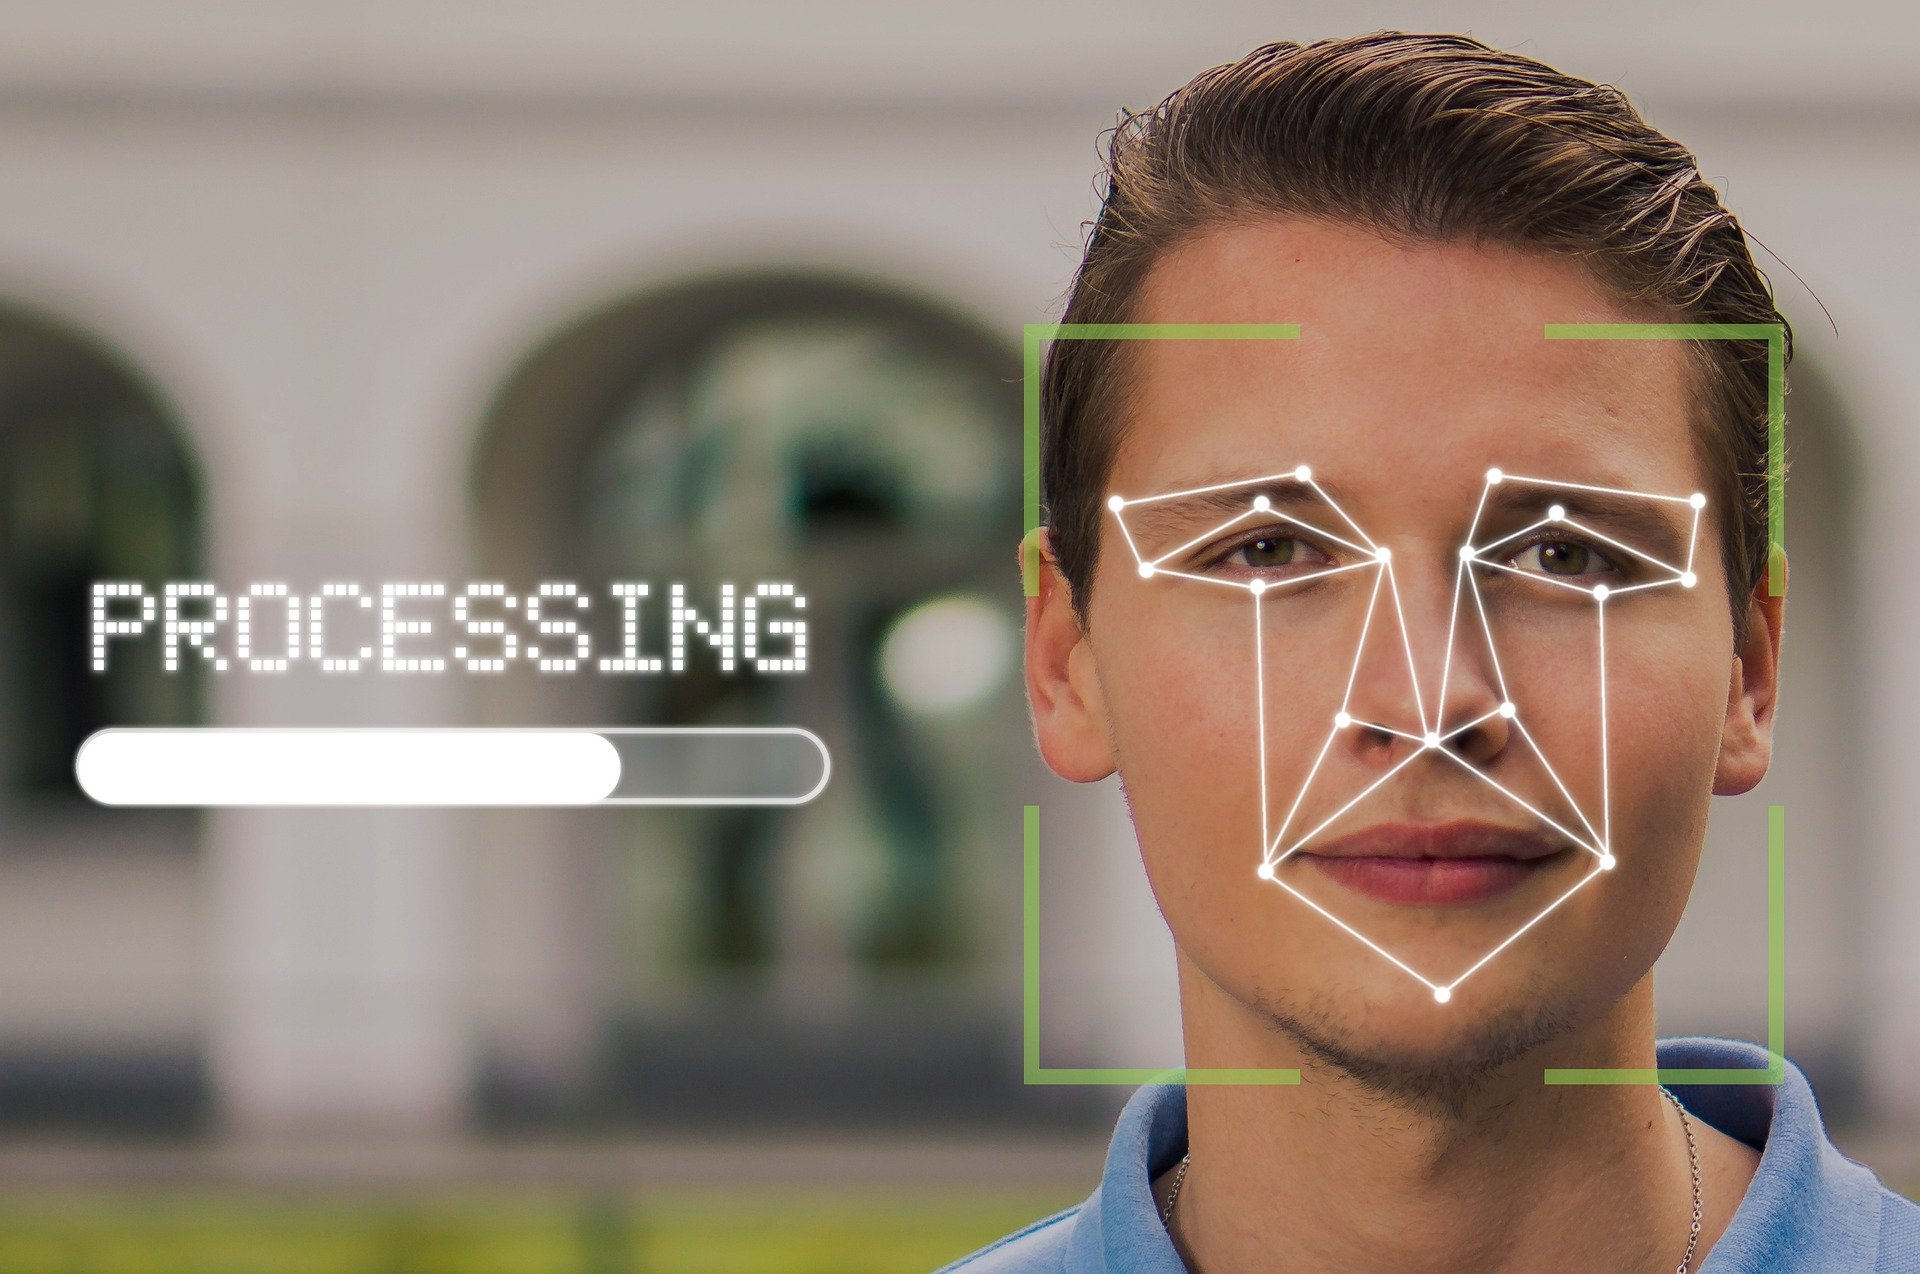 Facial Recognition Technology and How it Works